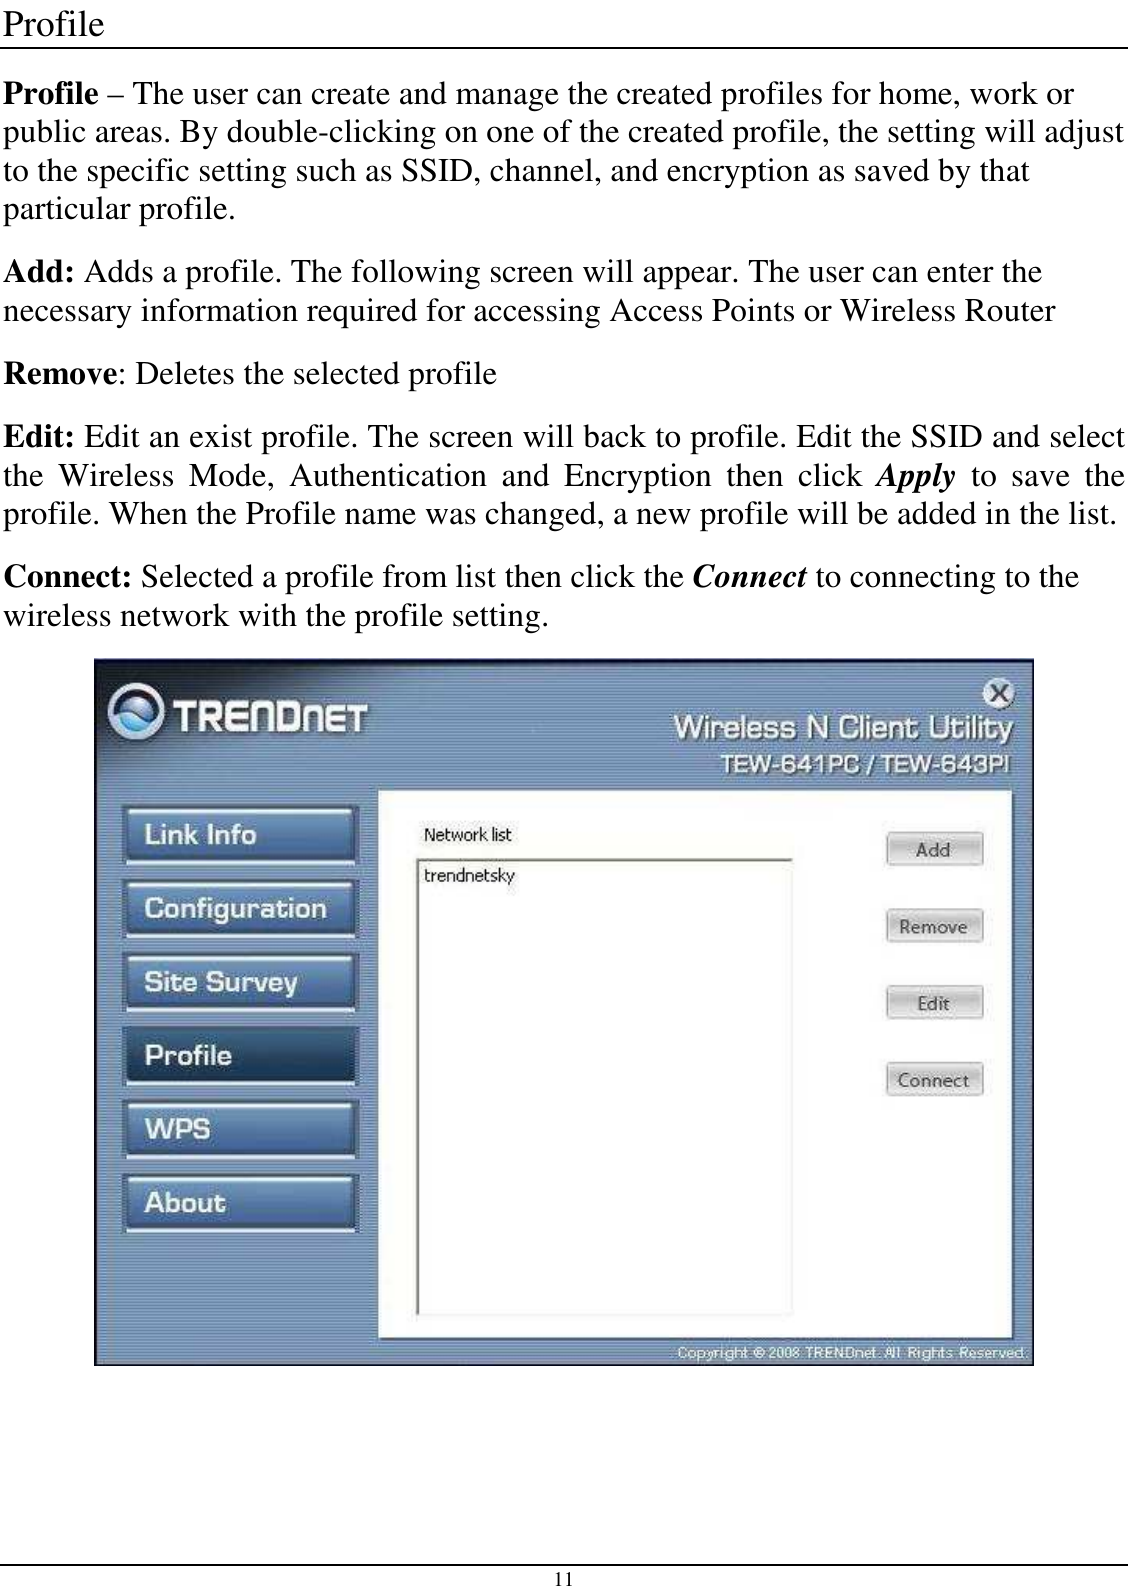 11 Profile Profile – The user can create and manage the created profiles for home, work or public areas. By double-clicking on one of the created profile, the setting will adjust to the specific setting such as SSID, channel, and encryption as saved by that particular profile. Add: Adds a profile. The following screen will appear. The user can enter the necessary information required for accessing Access Points or Wireless Router Remove: Deletes the selected profile Edit: Edit an exist profile. The screen will back to profile. Edit the SSID and select the  Wireless  Mode,  Authentication  and  Encryption  then  click  Apply  to  save  the profile. When the Profile name was changed, a new profile will be added in the list. Connect: Selected a profile from list then click the Connect to connecting to the wireless network with the profile setting.   